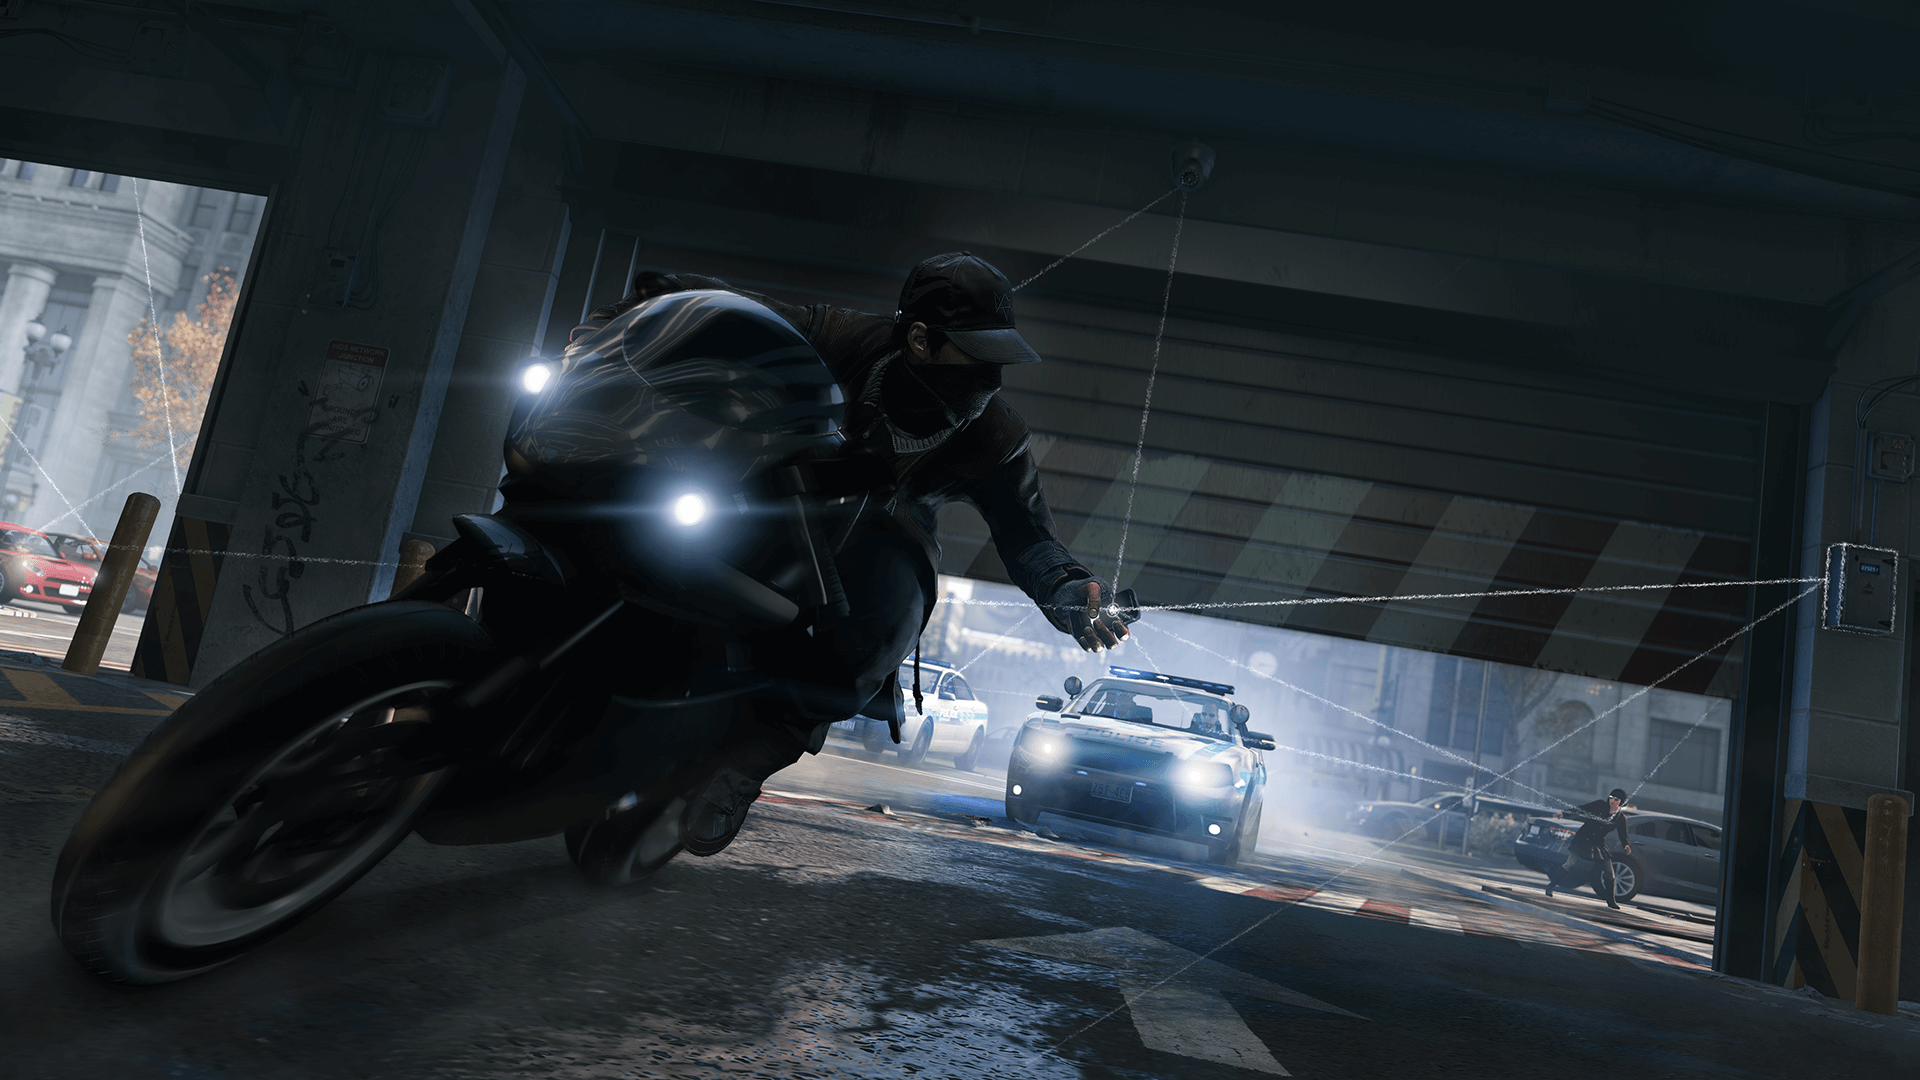 Marketing photo from Watch Dogs showing the protagonist on a motorcycle being chased by police. The protagonist is closing a parking garage door on the police in pursuit from his cellphone.